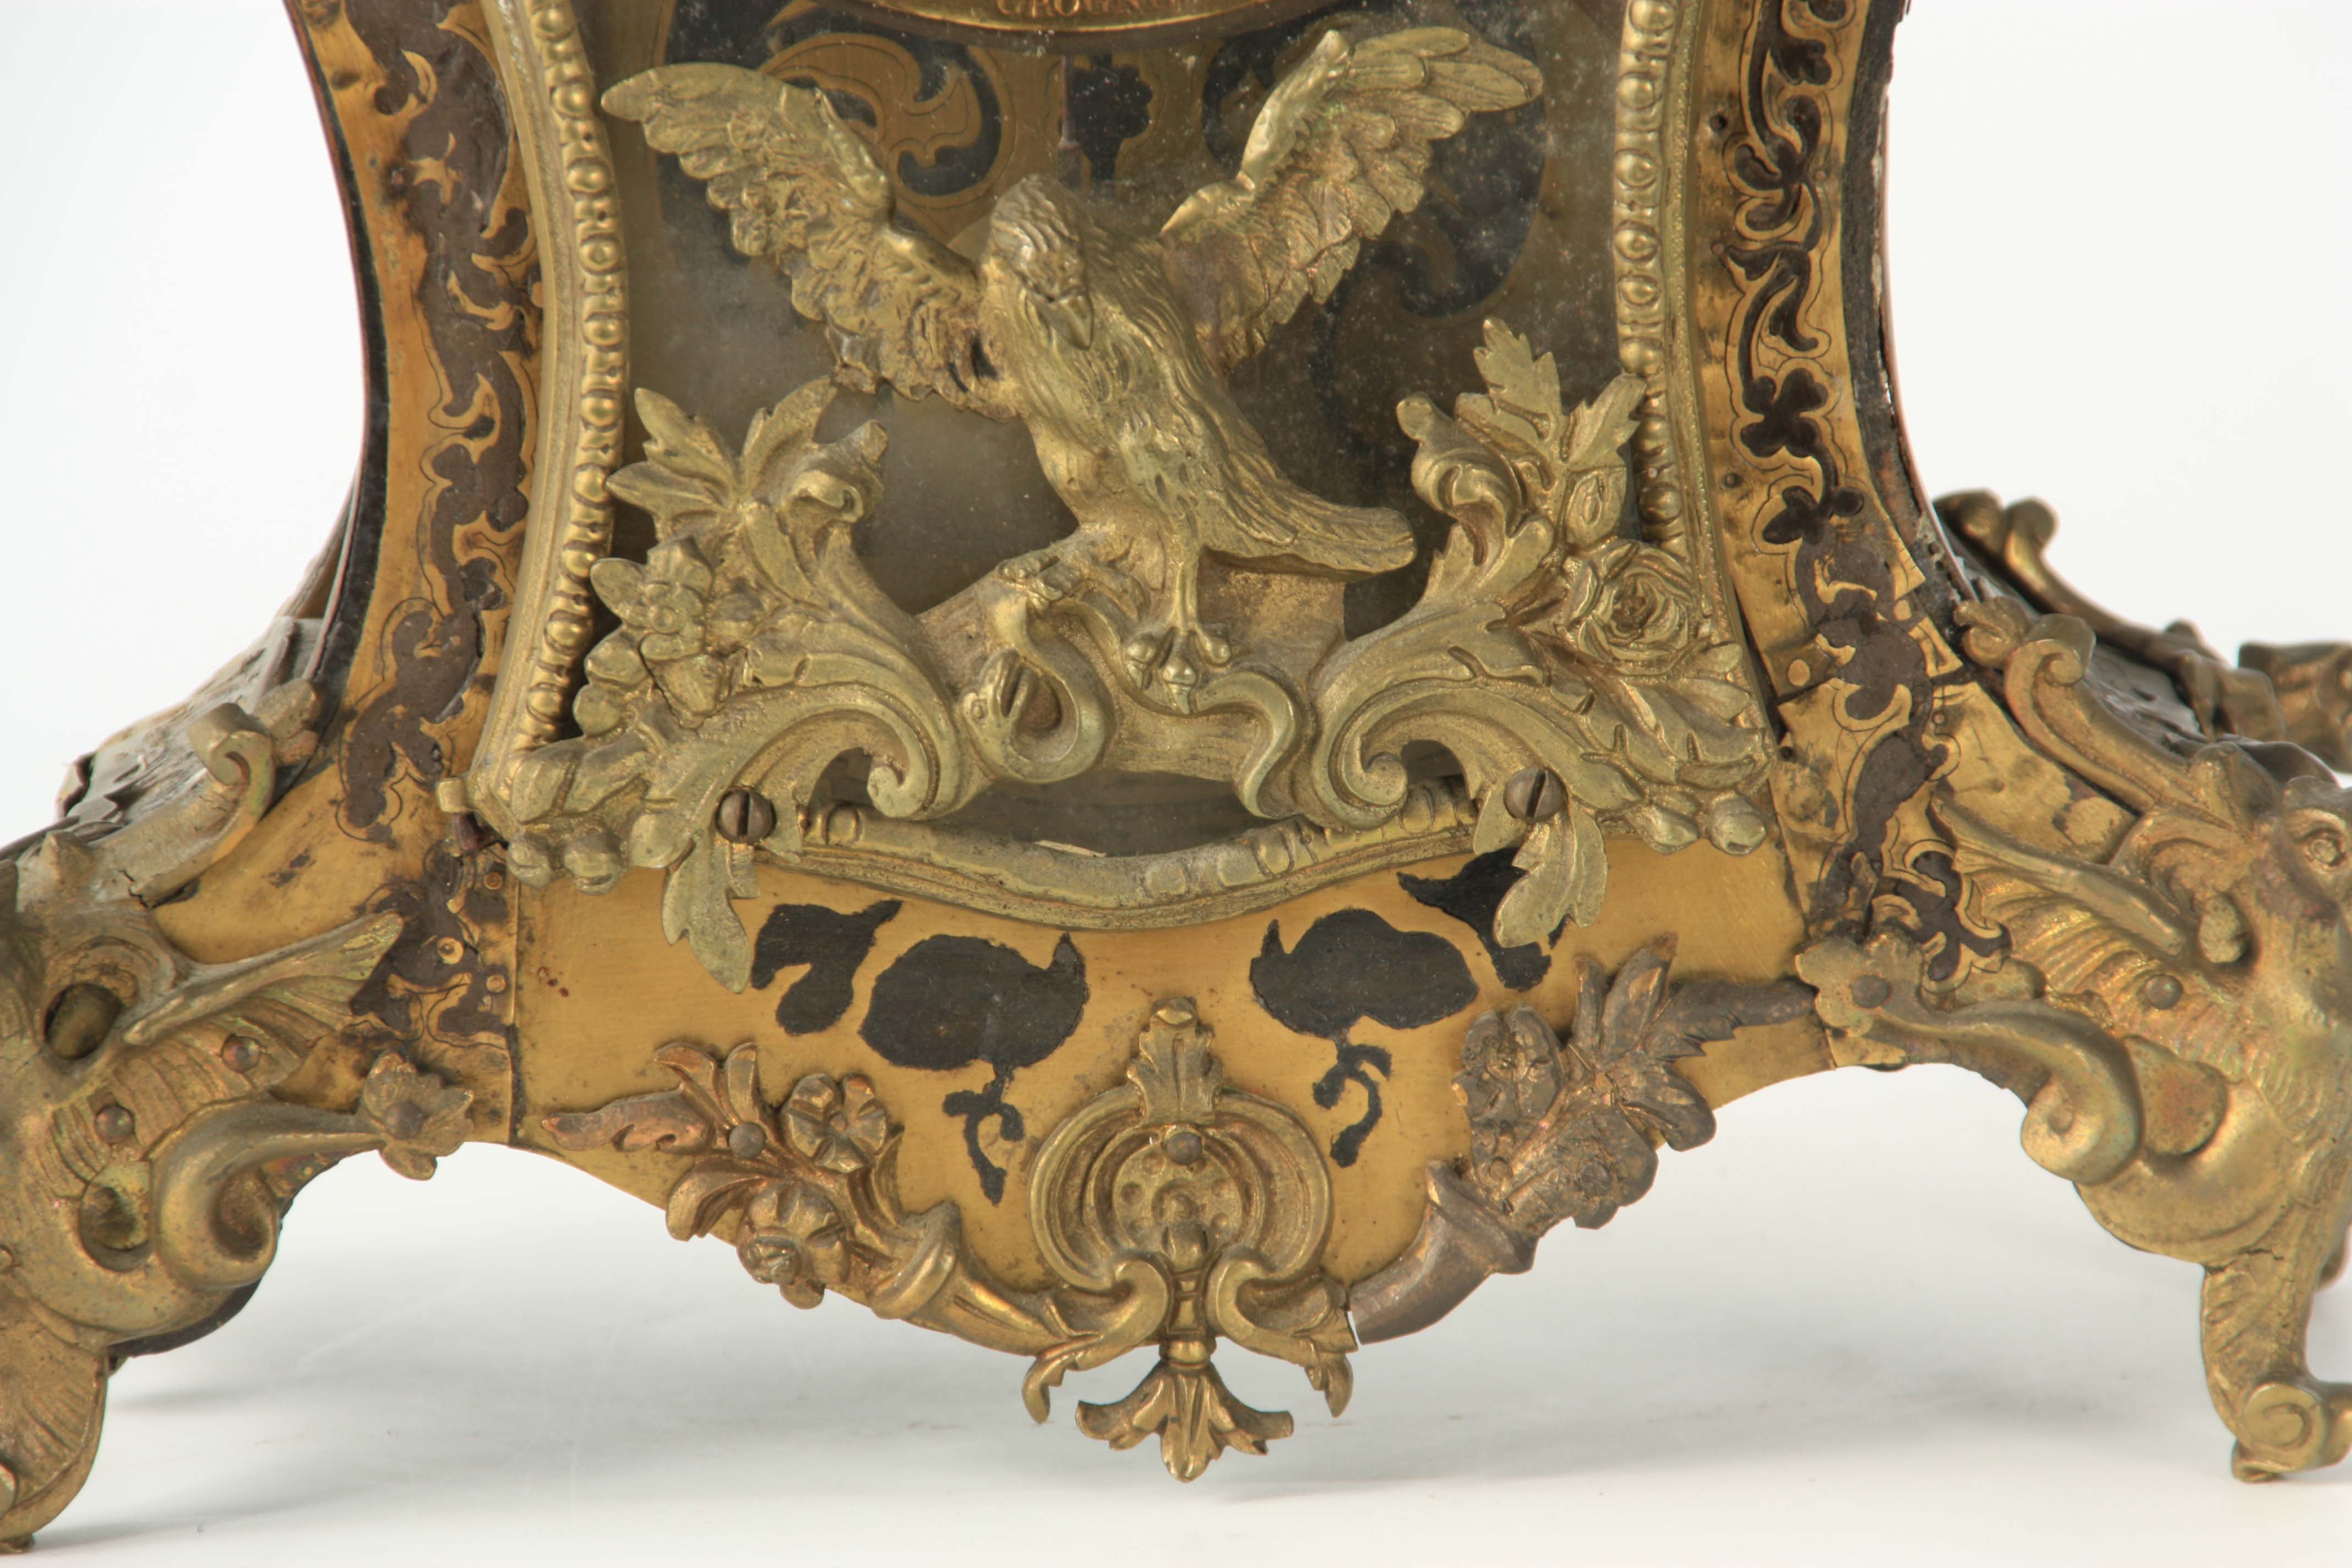 GROGNIE, A PARIS. AN EARLY 19TH CENTURY FRENCH CONTRA BOULLE MANTEL CLOCK the balloon-shaped case - Image 3 of 7